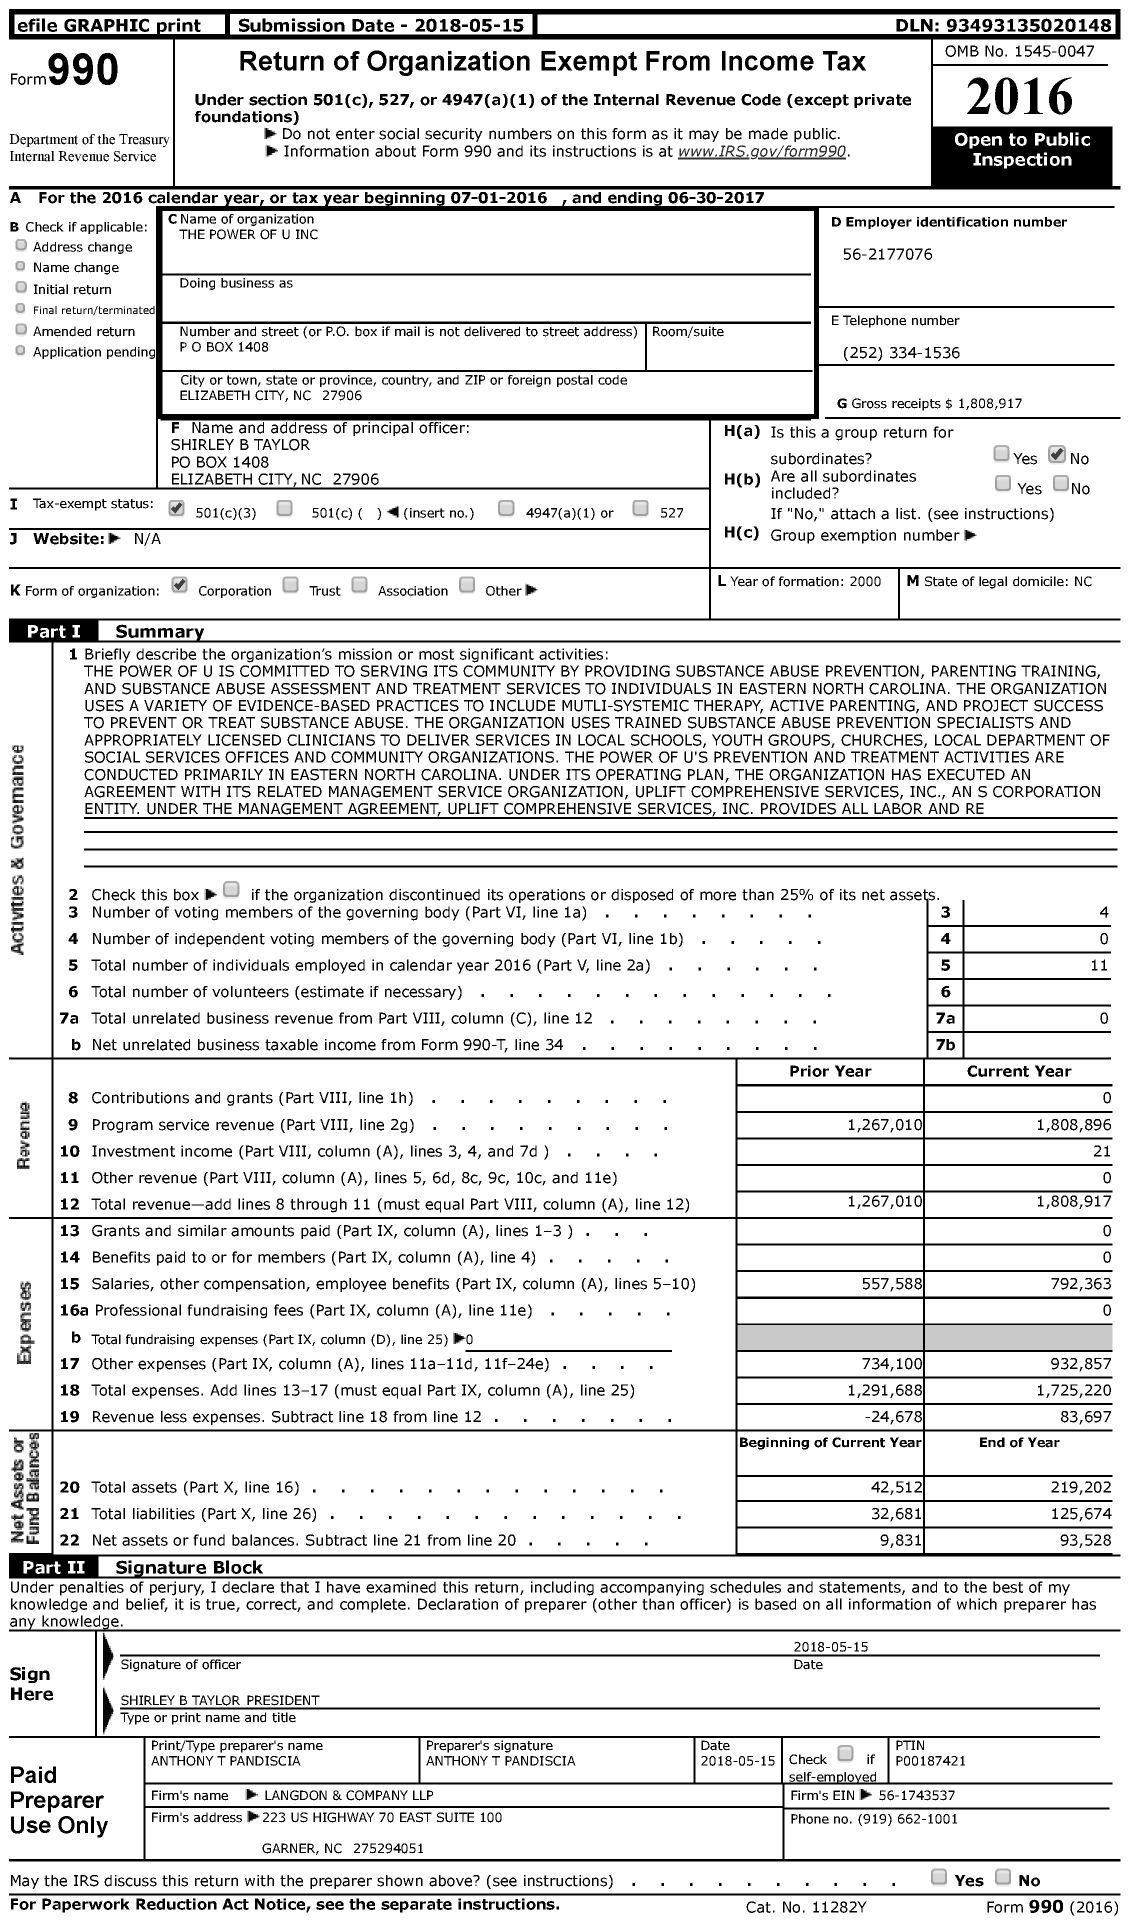 Image of first page of 2016 Form 990 for The Power of U